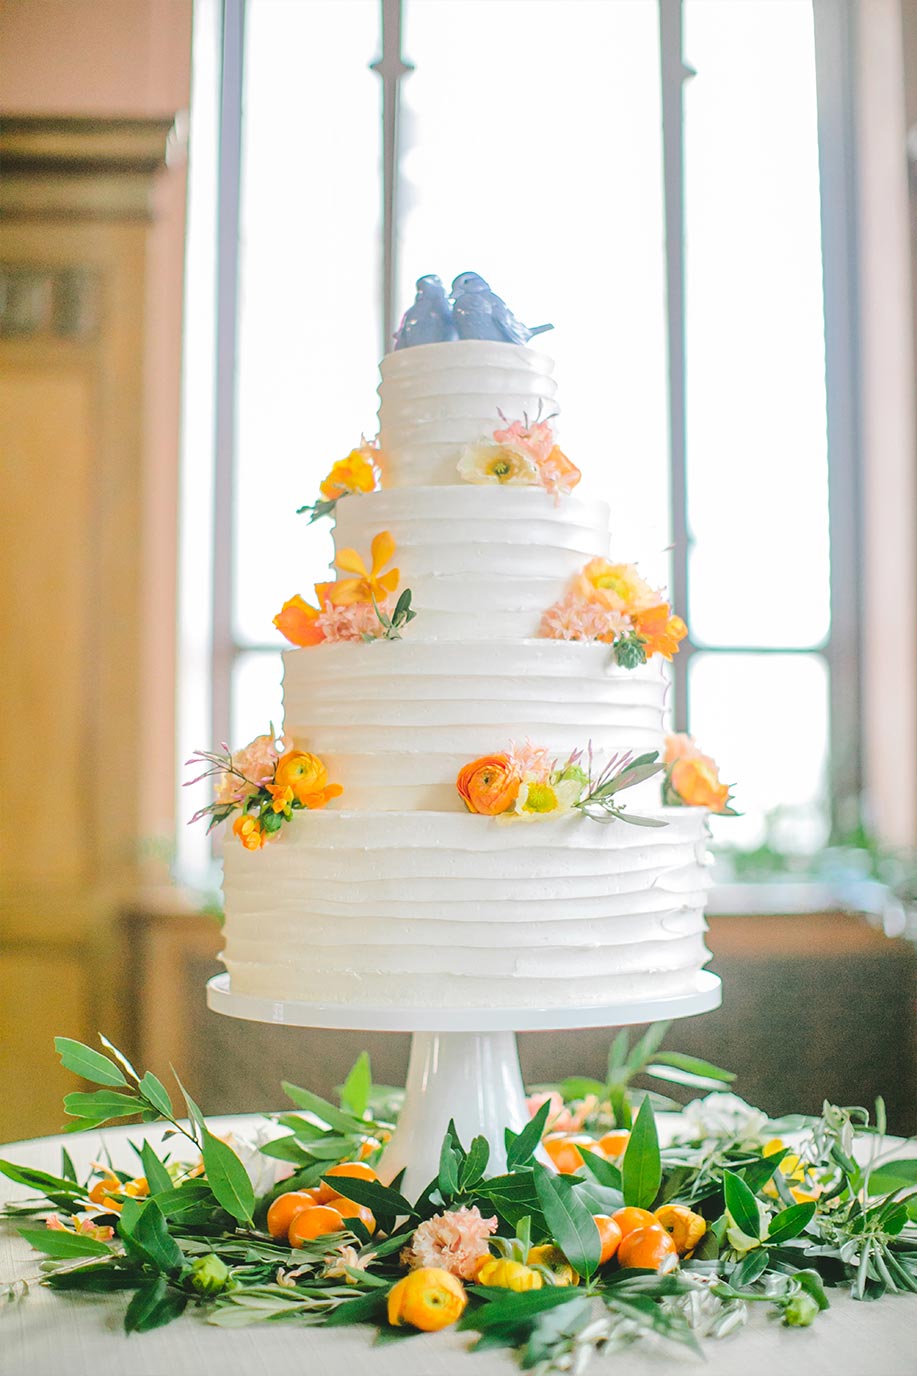 Buttercream wedding cake with orange and yellow flowers and blue and white porcelain topper